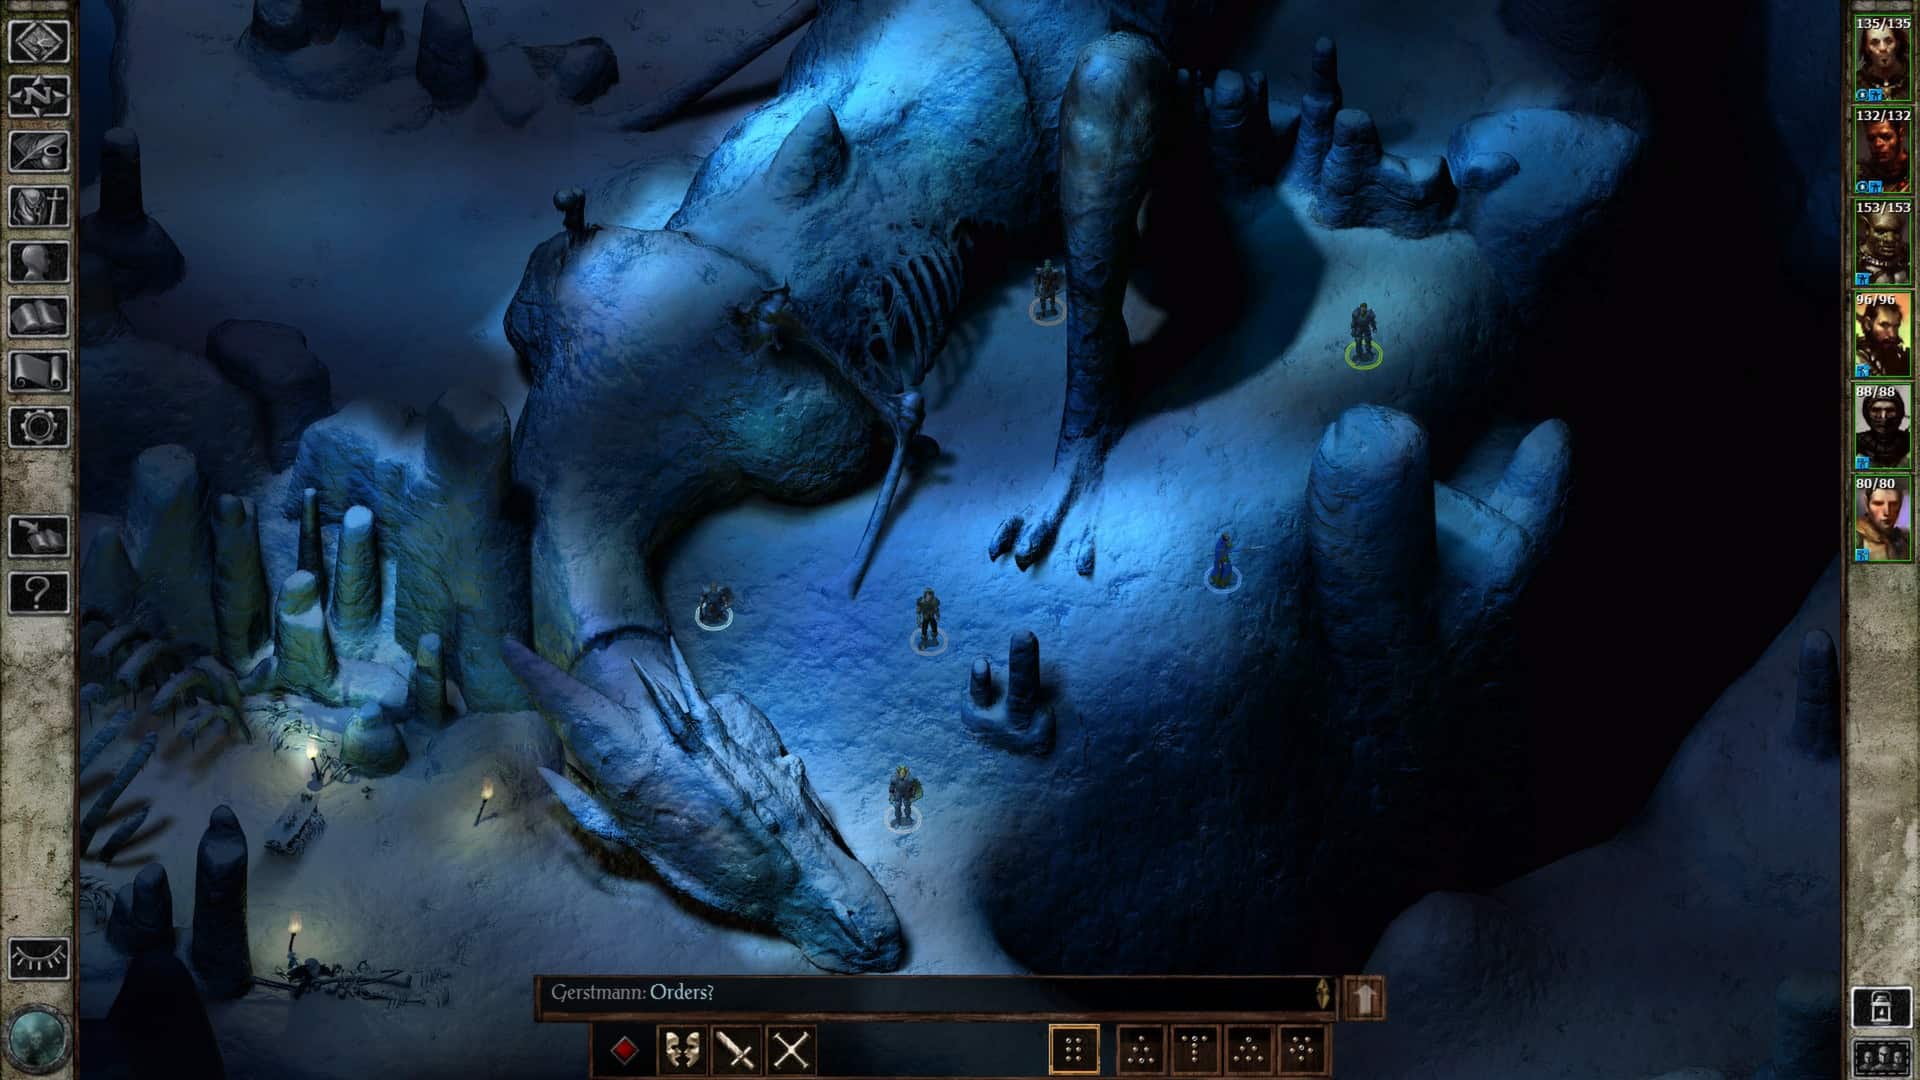 Icewind Dale Enhanced Edition by Beamdog, a remaster of a classic cRPG.